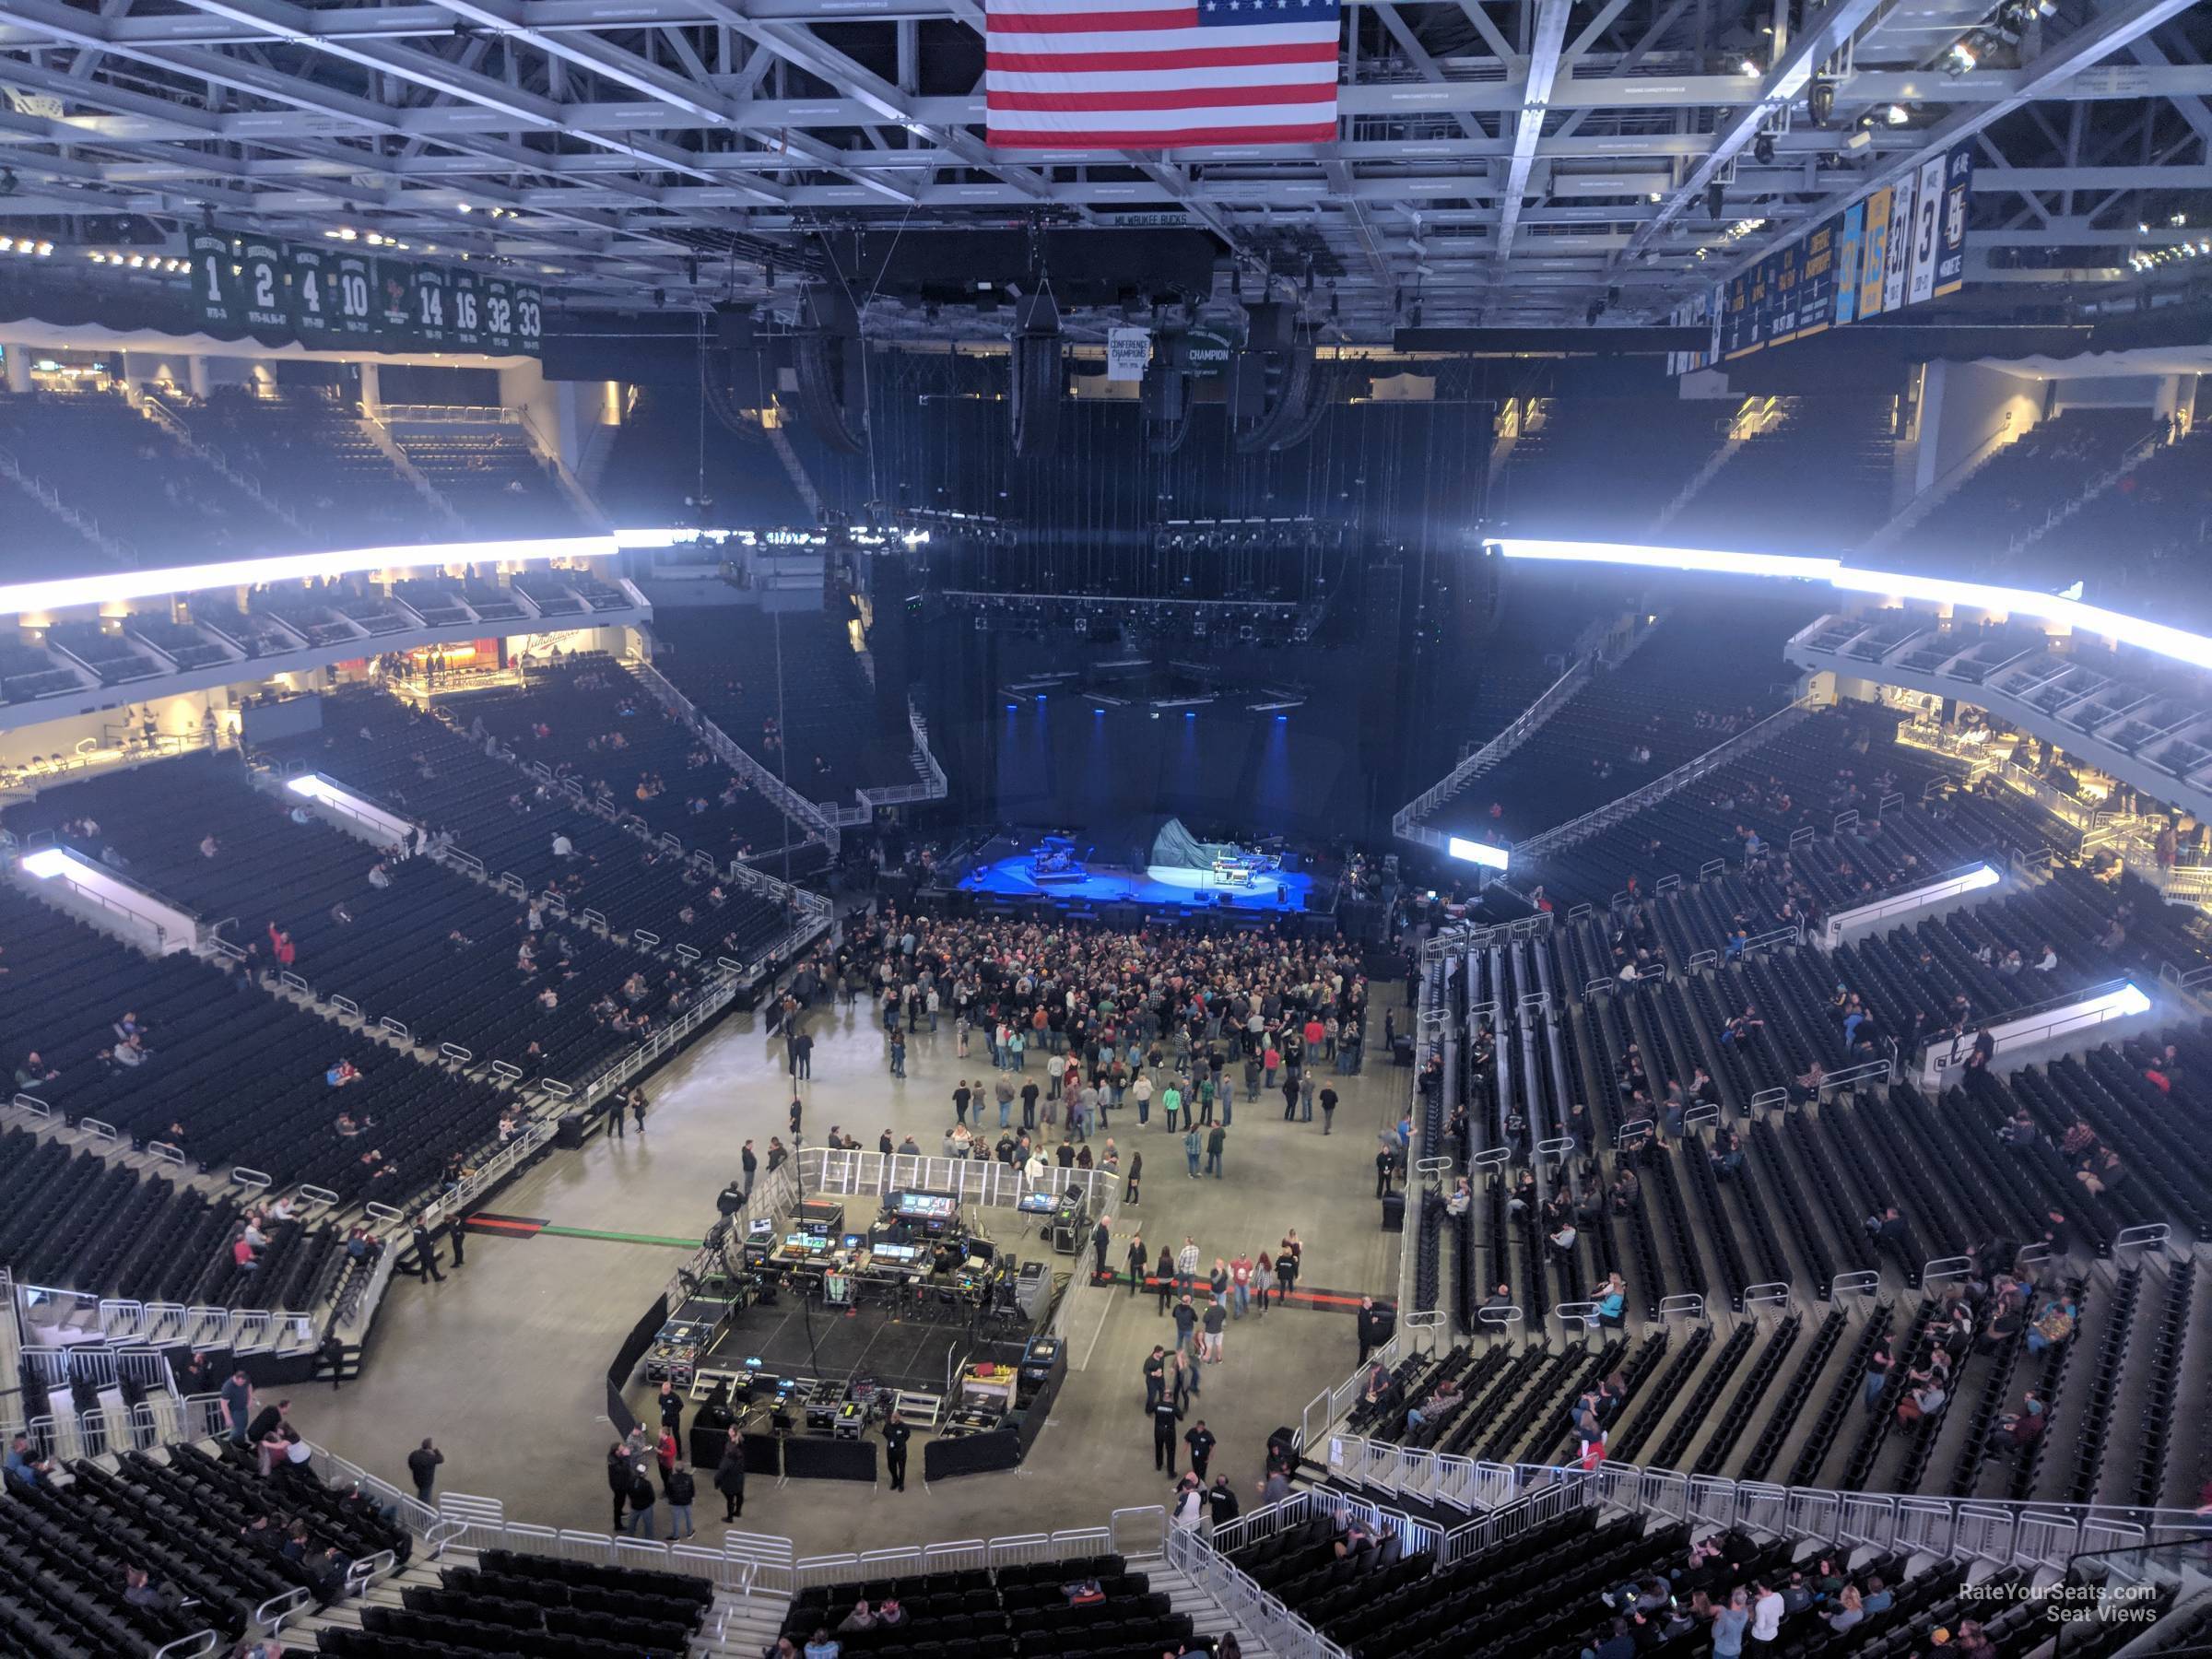 section 228, row 8 seat view  for concert - fiserv forum